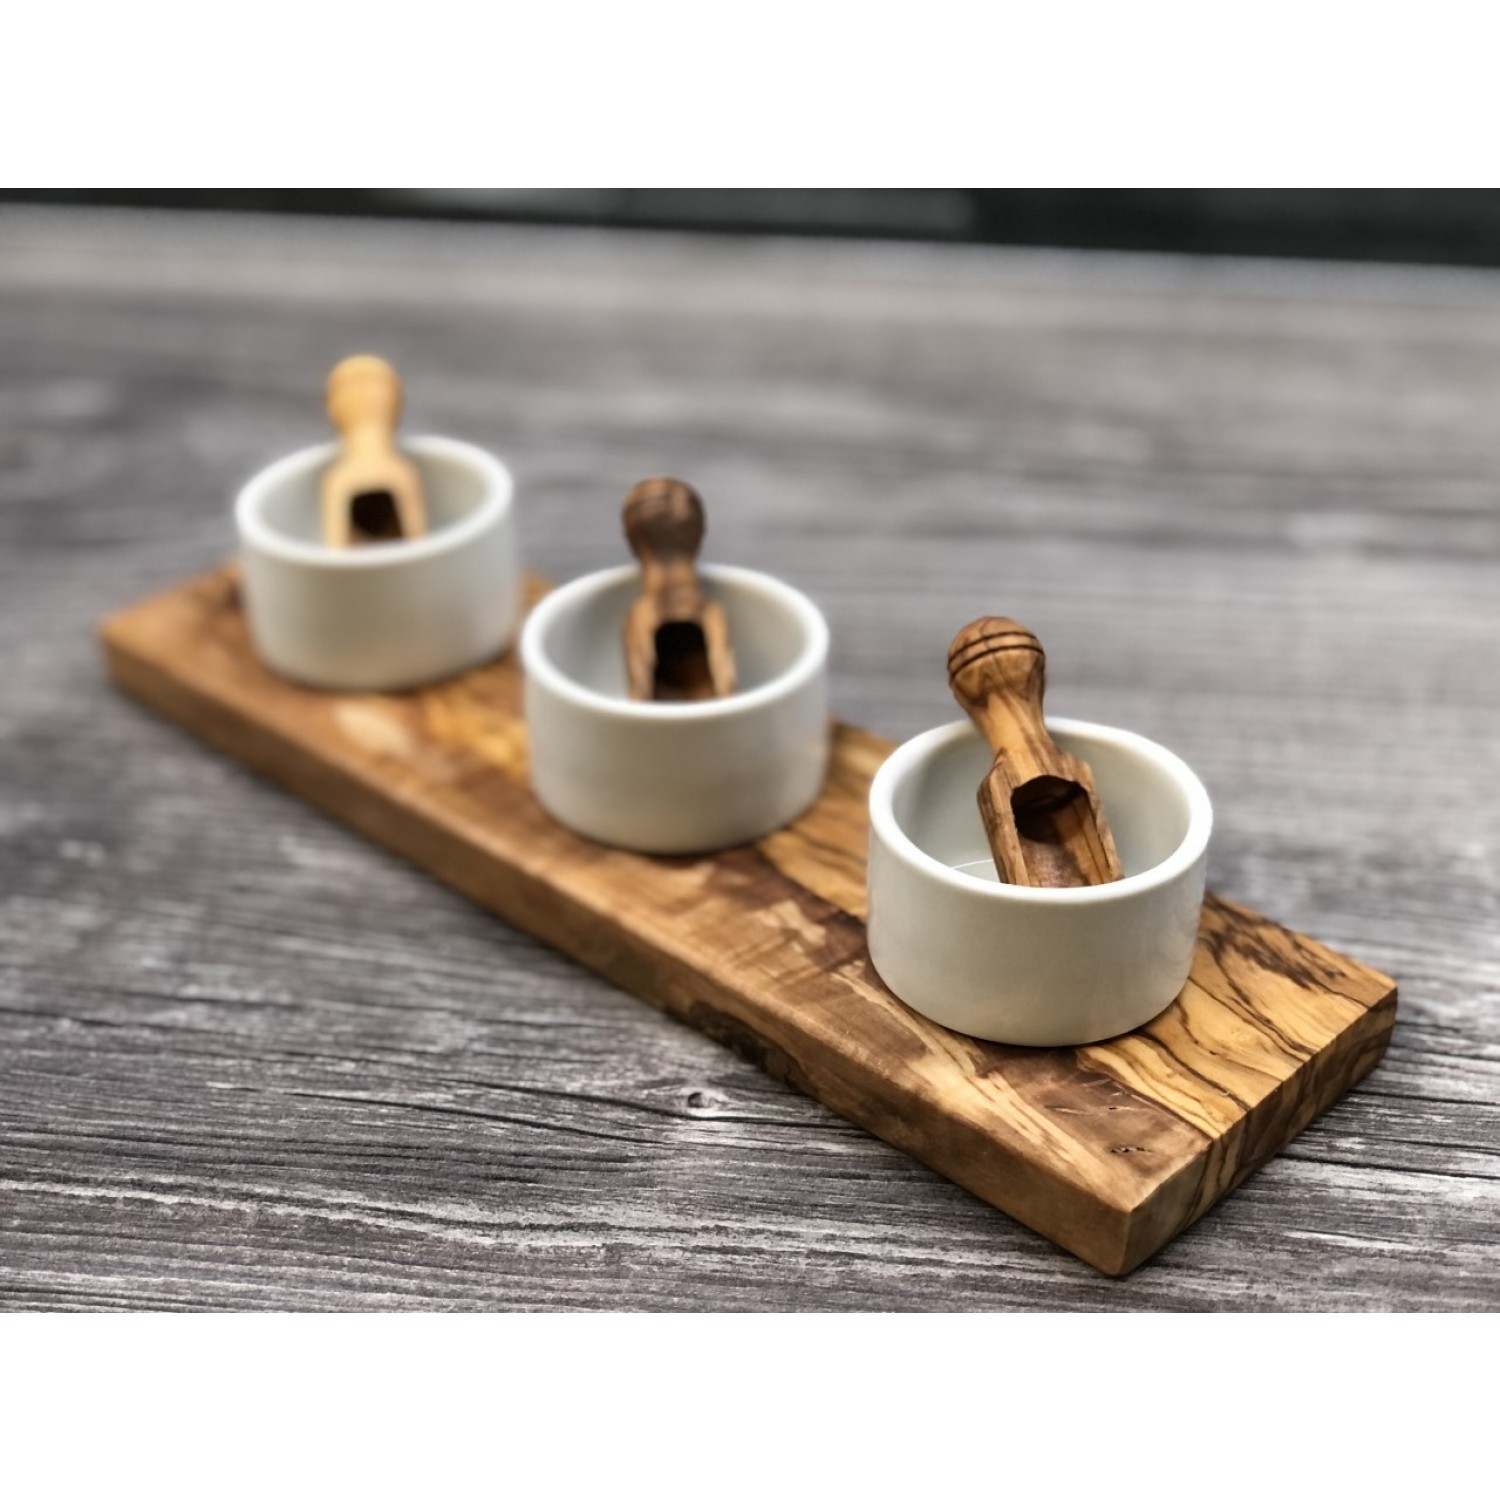 Dipping bowls 3 pieces on an olive wood tray incl. shovels